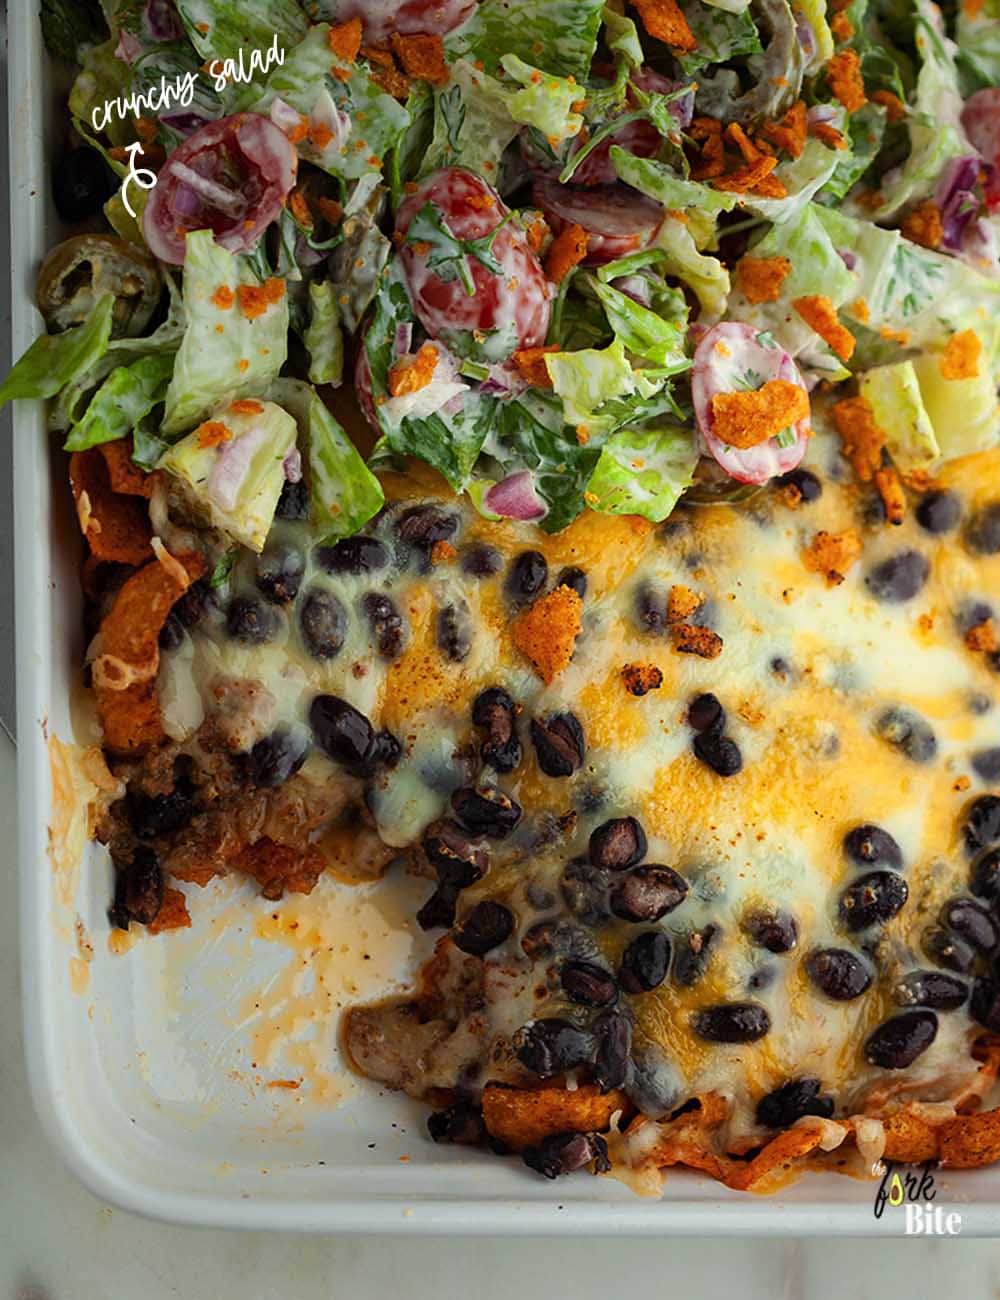 You can rotate your toppings: refried beans, salsa, sliced black olives, shredded lettuce, sour cream, chopped cilantro, shredded cheese, diced tomatoes, lime wedges, Fritos, and sliced jalapenos.